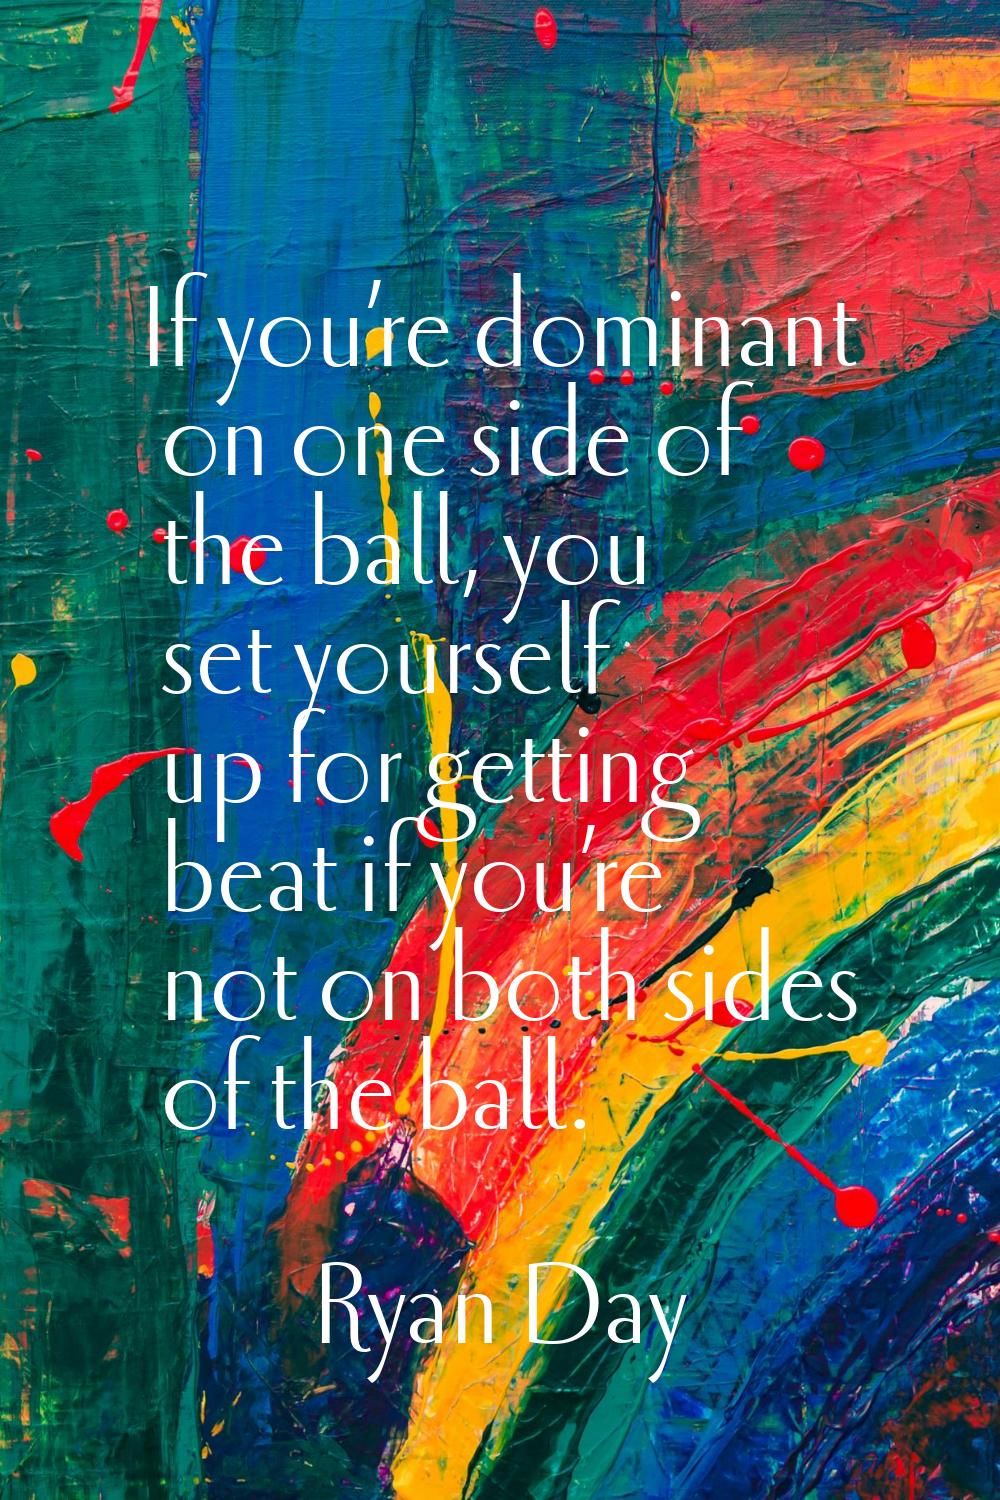 If you’re dominant on one side of the ball, you set yourself up for getting beat if you’re not on b